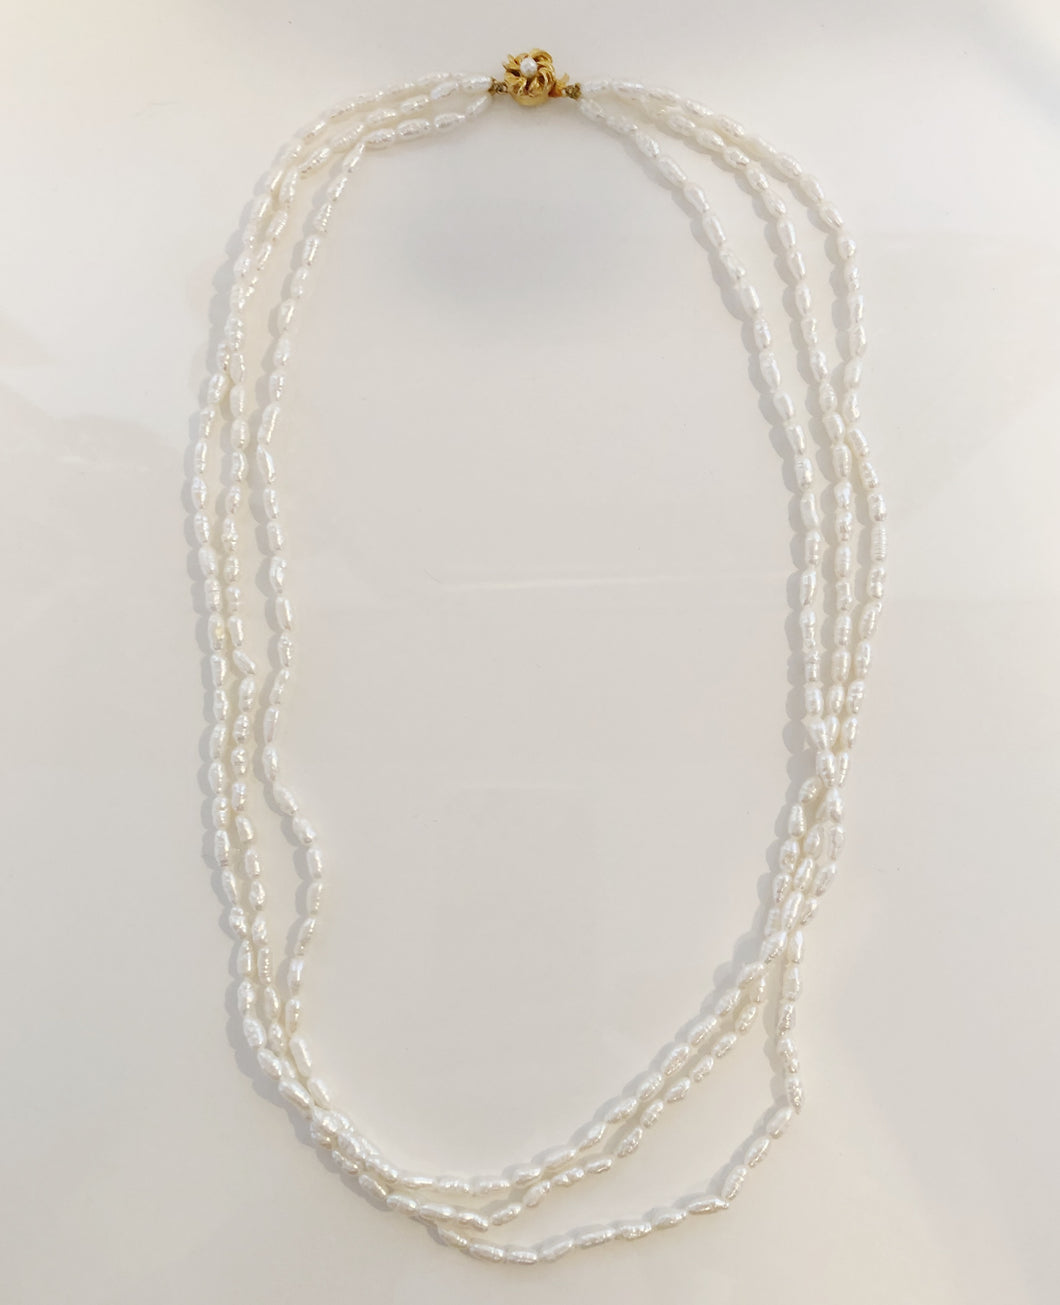 Vintage Triple Strand Freshwater Pearls Necklace